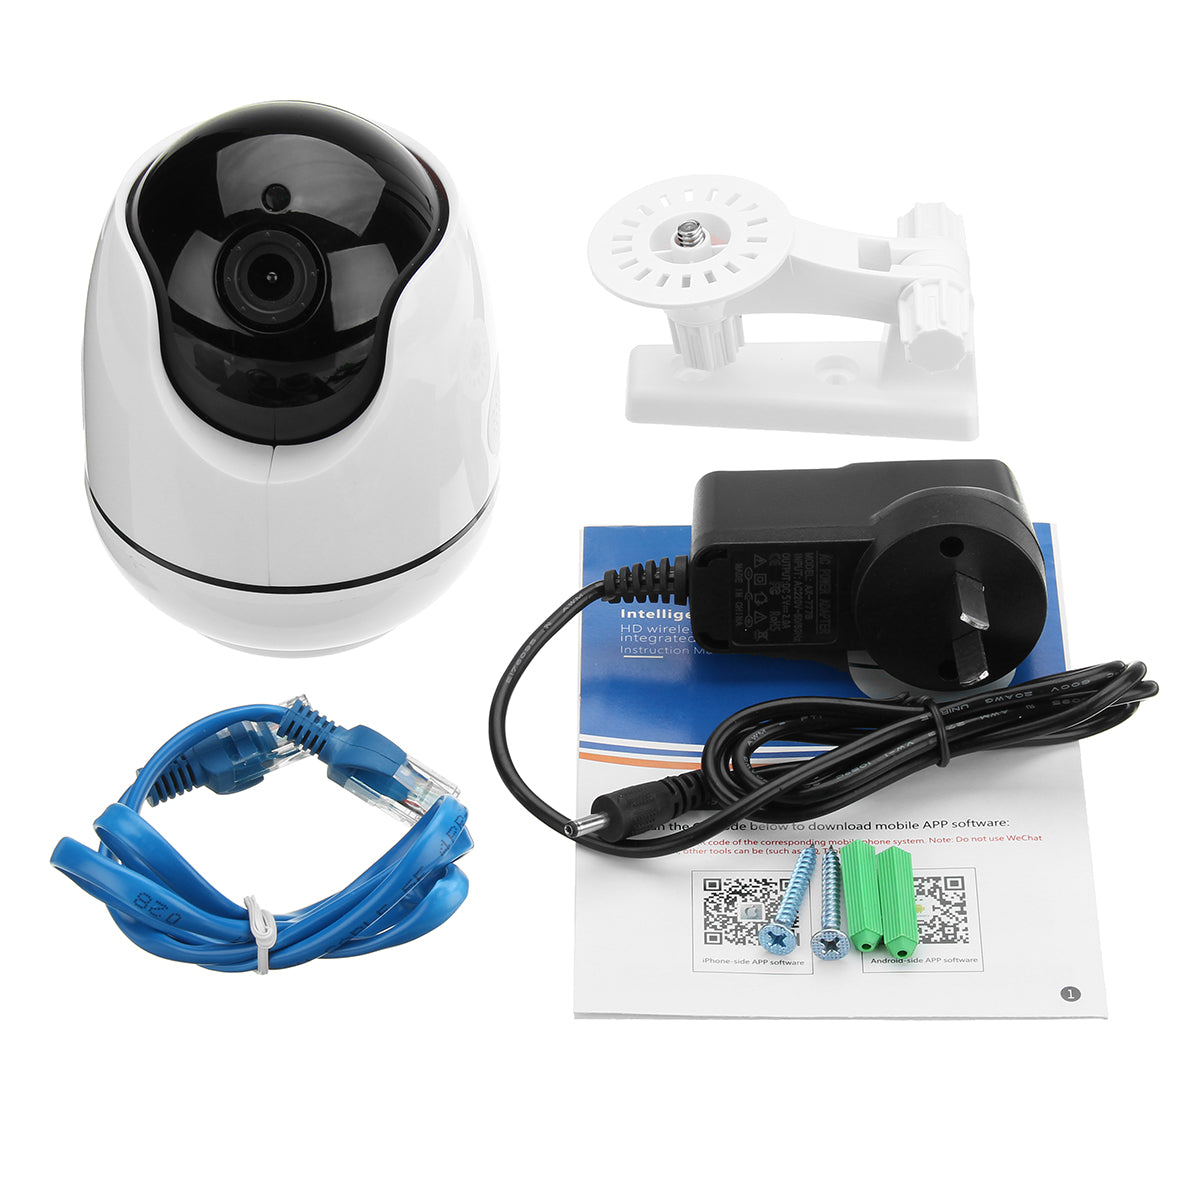 1080P 2.0MP Wifi Home Camera IP HD Security System Wireless Night Vision Indoor